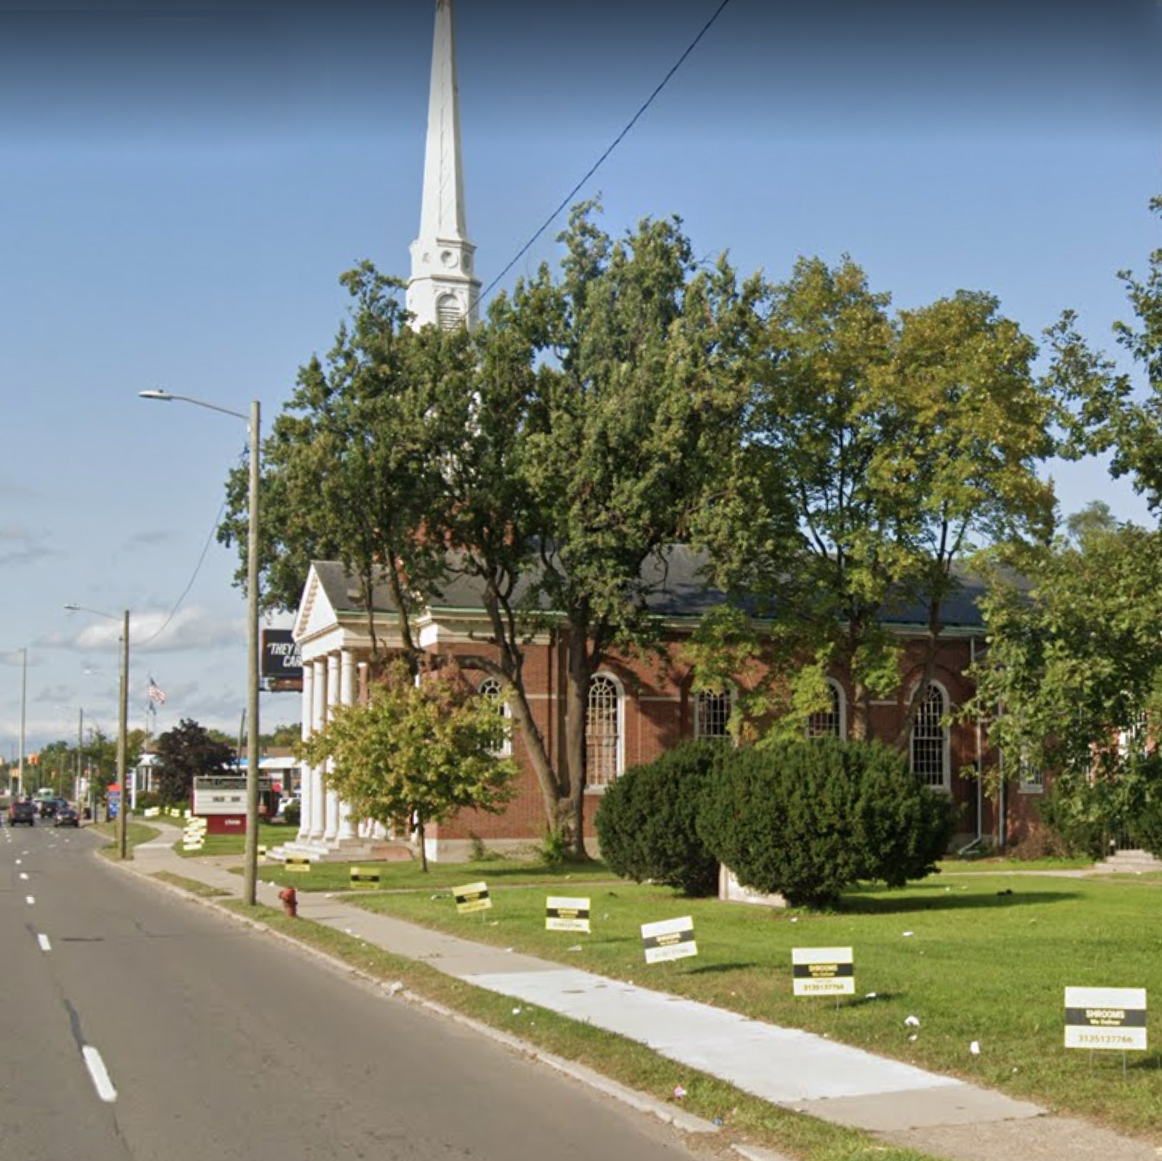 Signs saying "Shrooms: we deliver" for Soul Tribes International line the property of Bushnell Congregational Church in Detroit, Michigan. Image courtesy Google Maps